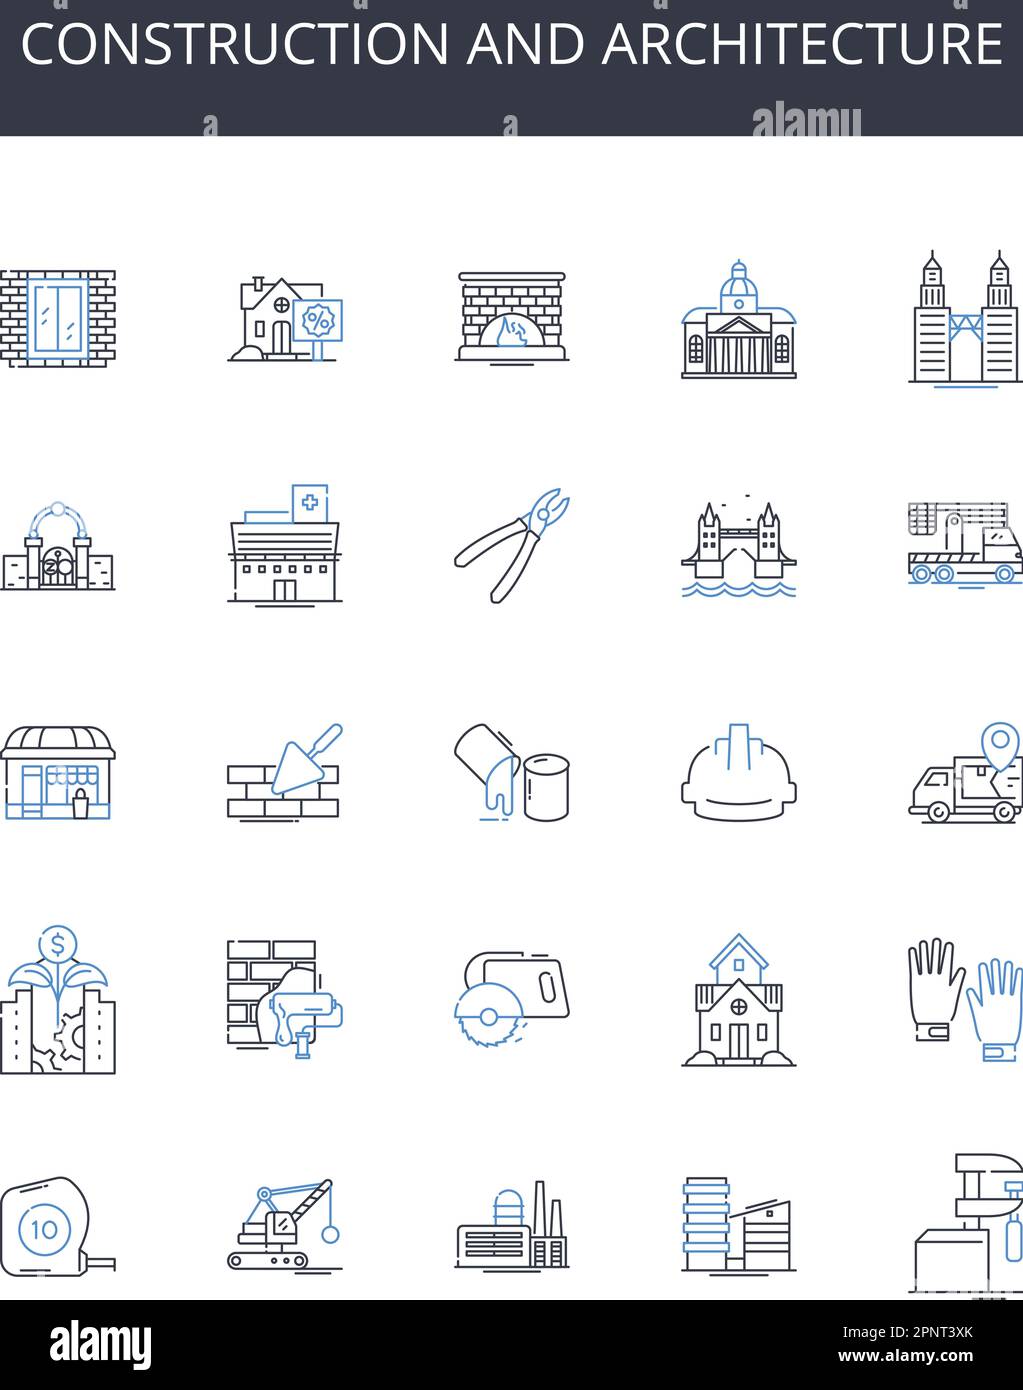 Construction and architecture line icons collection. Customization, Efficiency, Personalization, Interactivity, Functionality, User-friendly Stock Vector